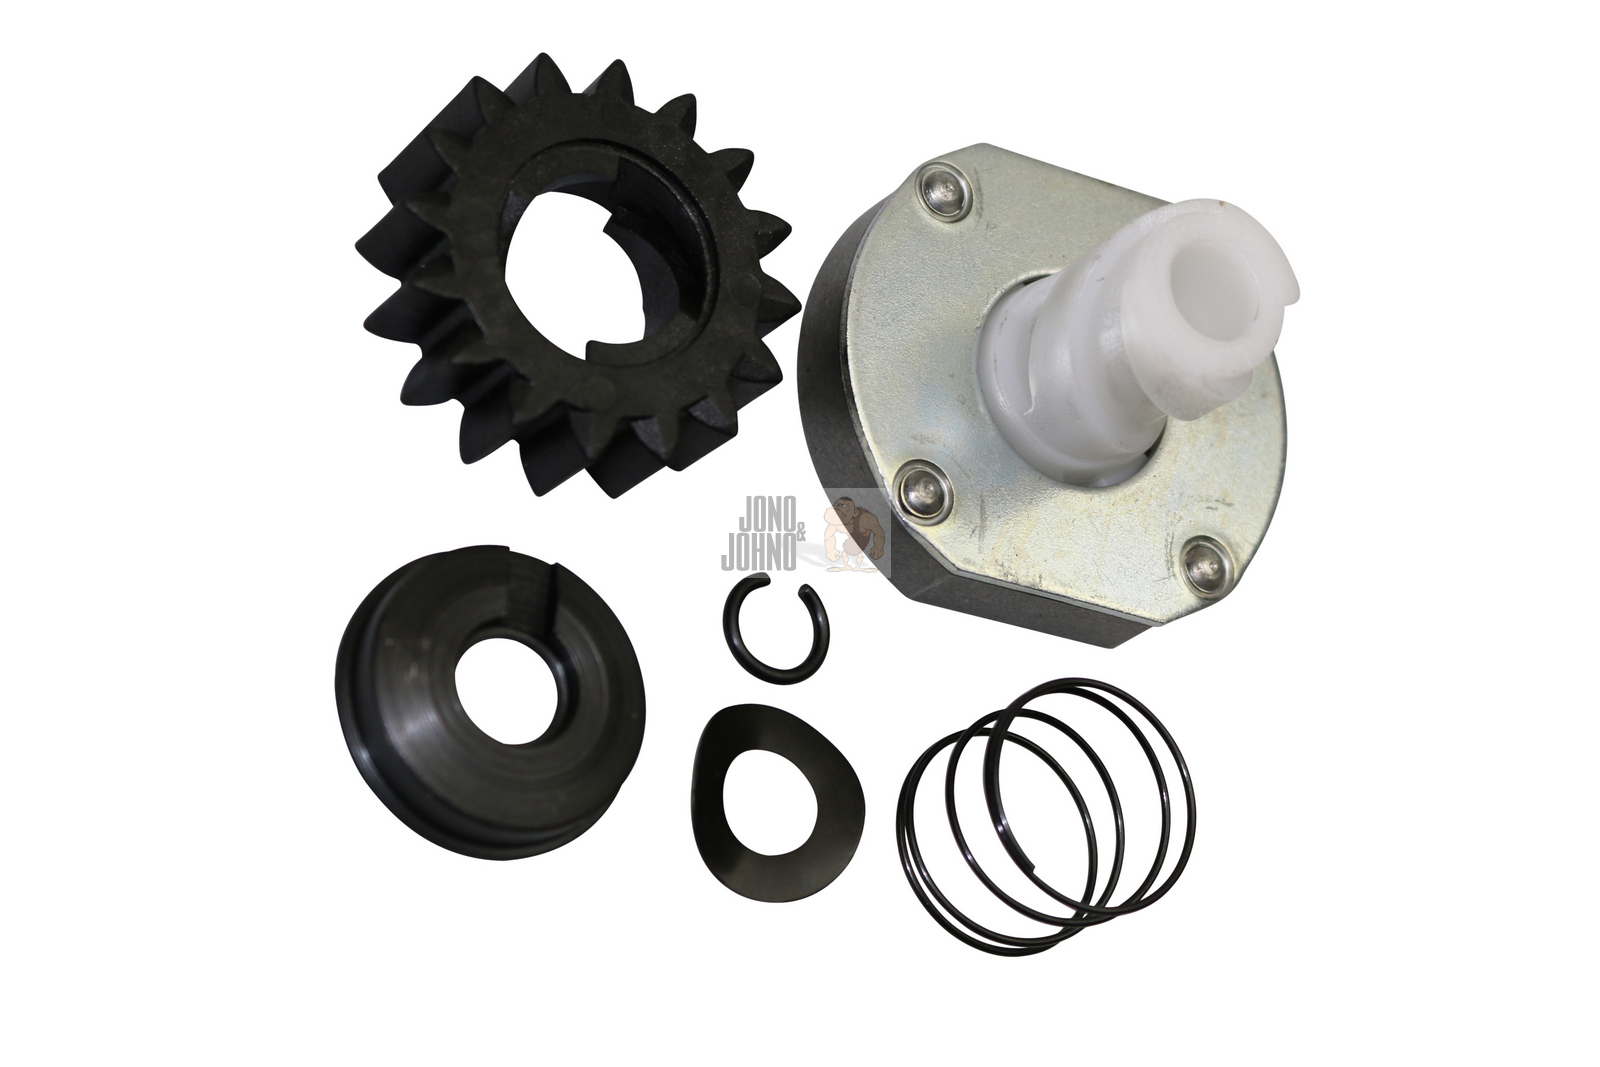 696541 Starter Drive Kit 16 Teeth For Briggs & Stratton 497606 